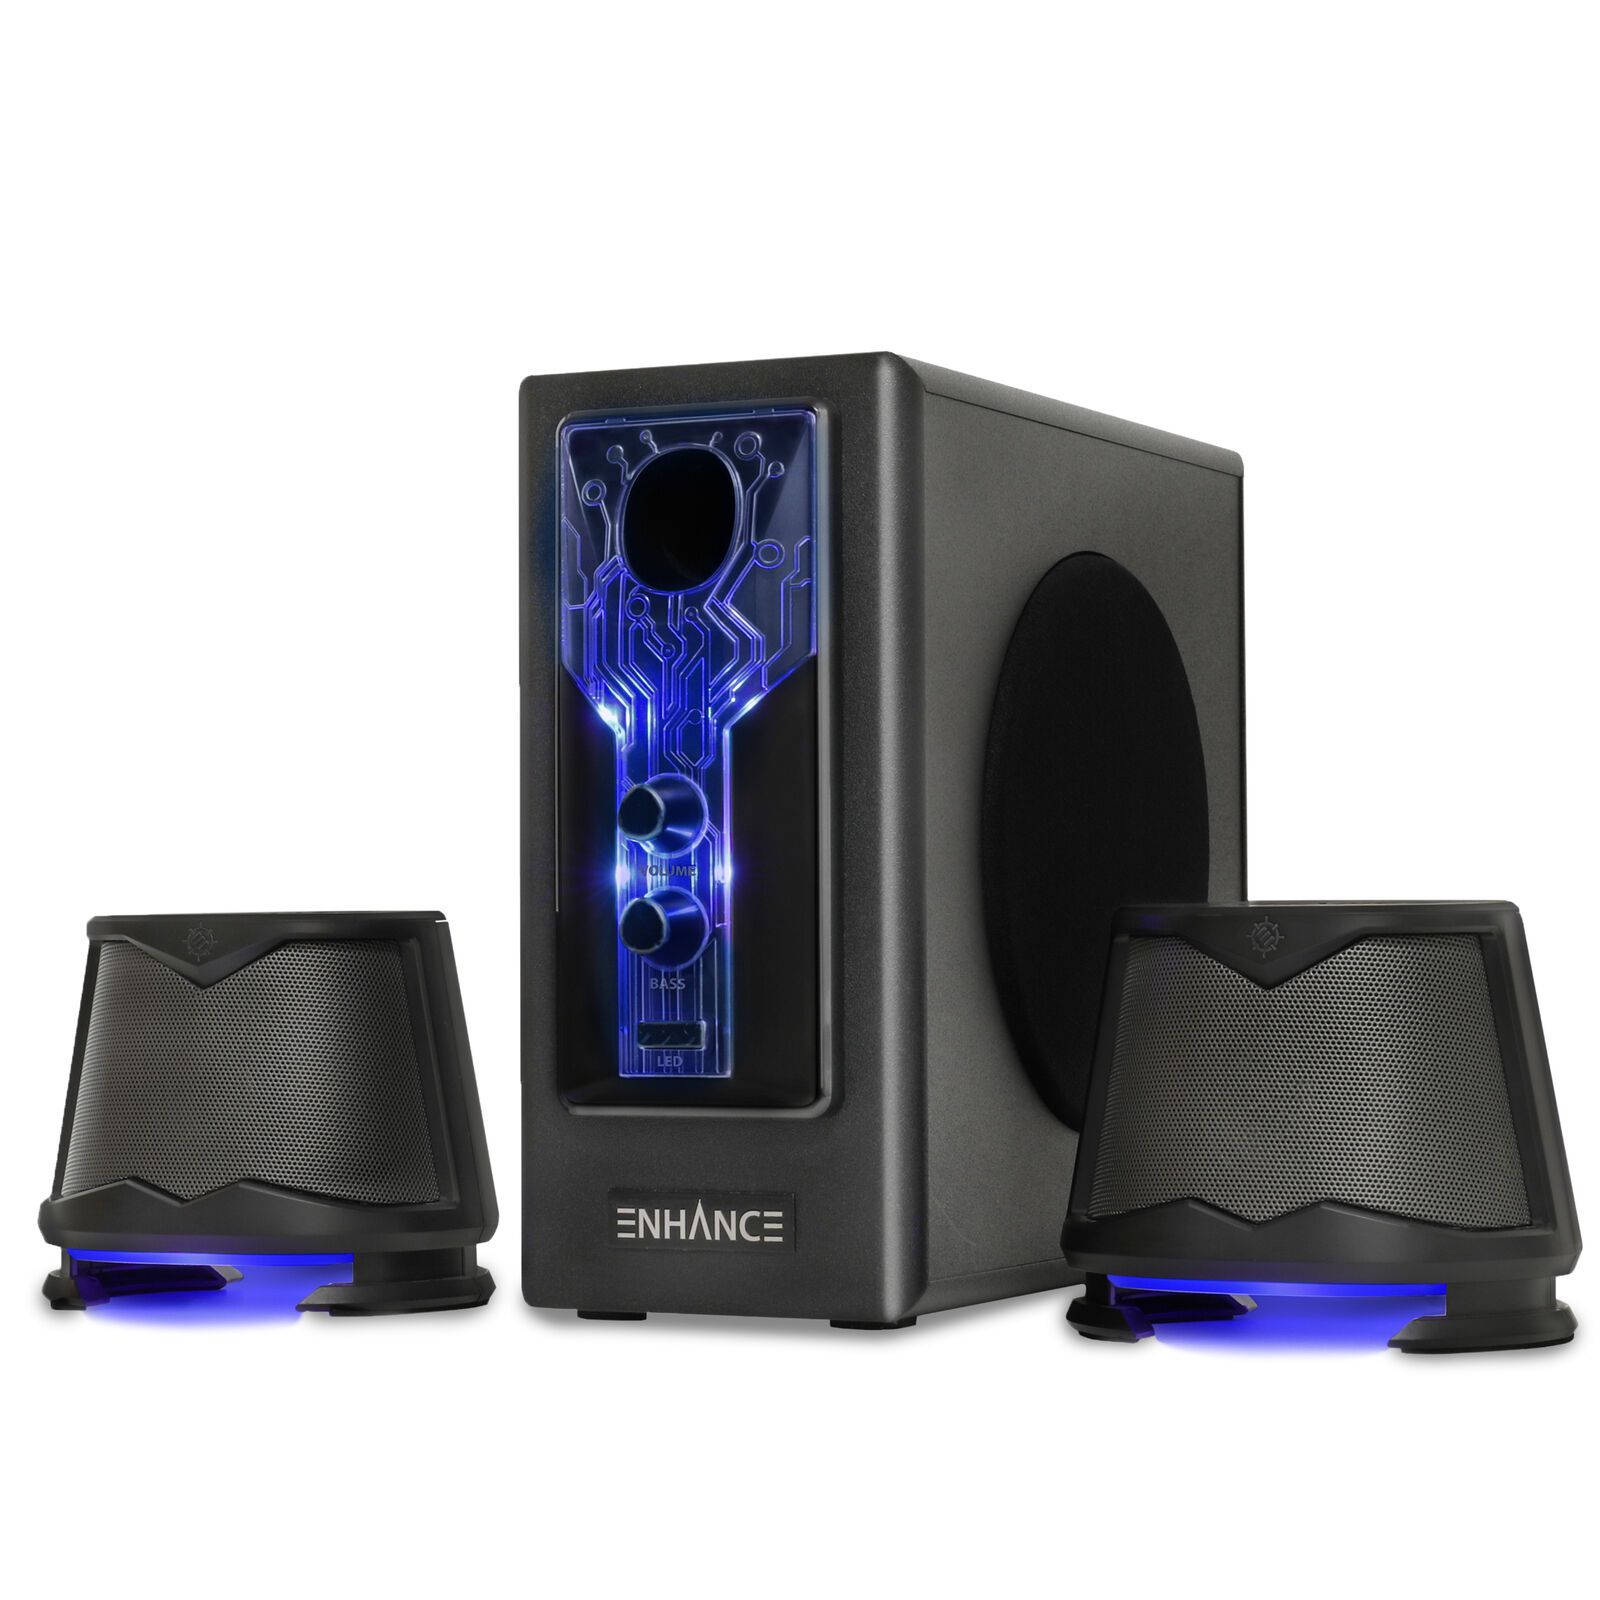 2.1 High Excursion Computer Speakers with Subwoofer - Blue LED Gaming Speakers